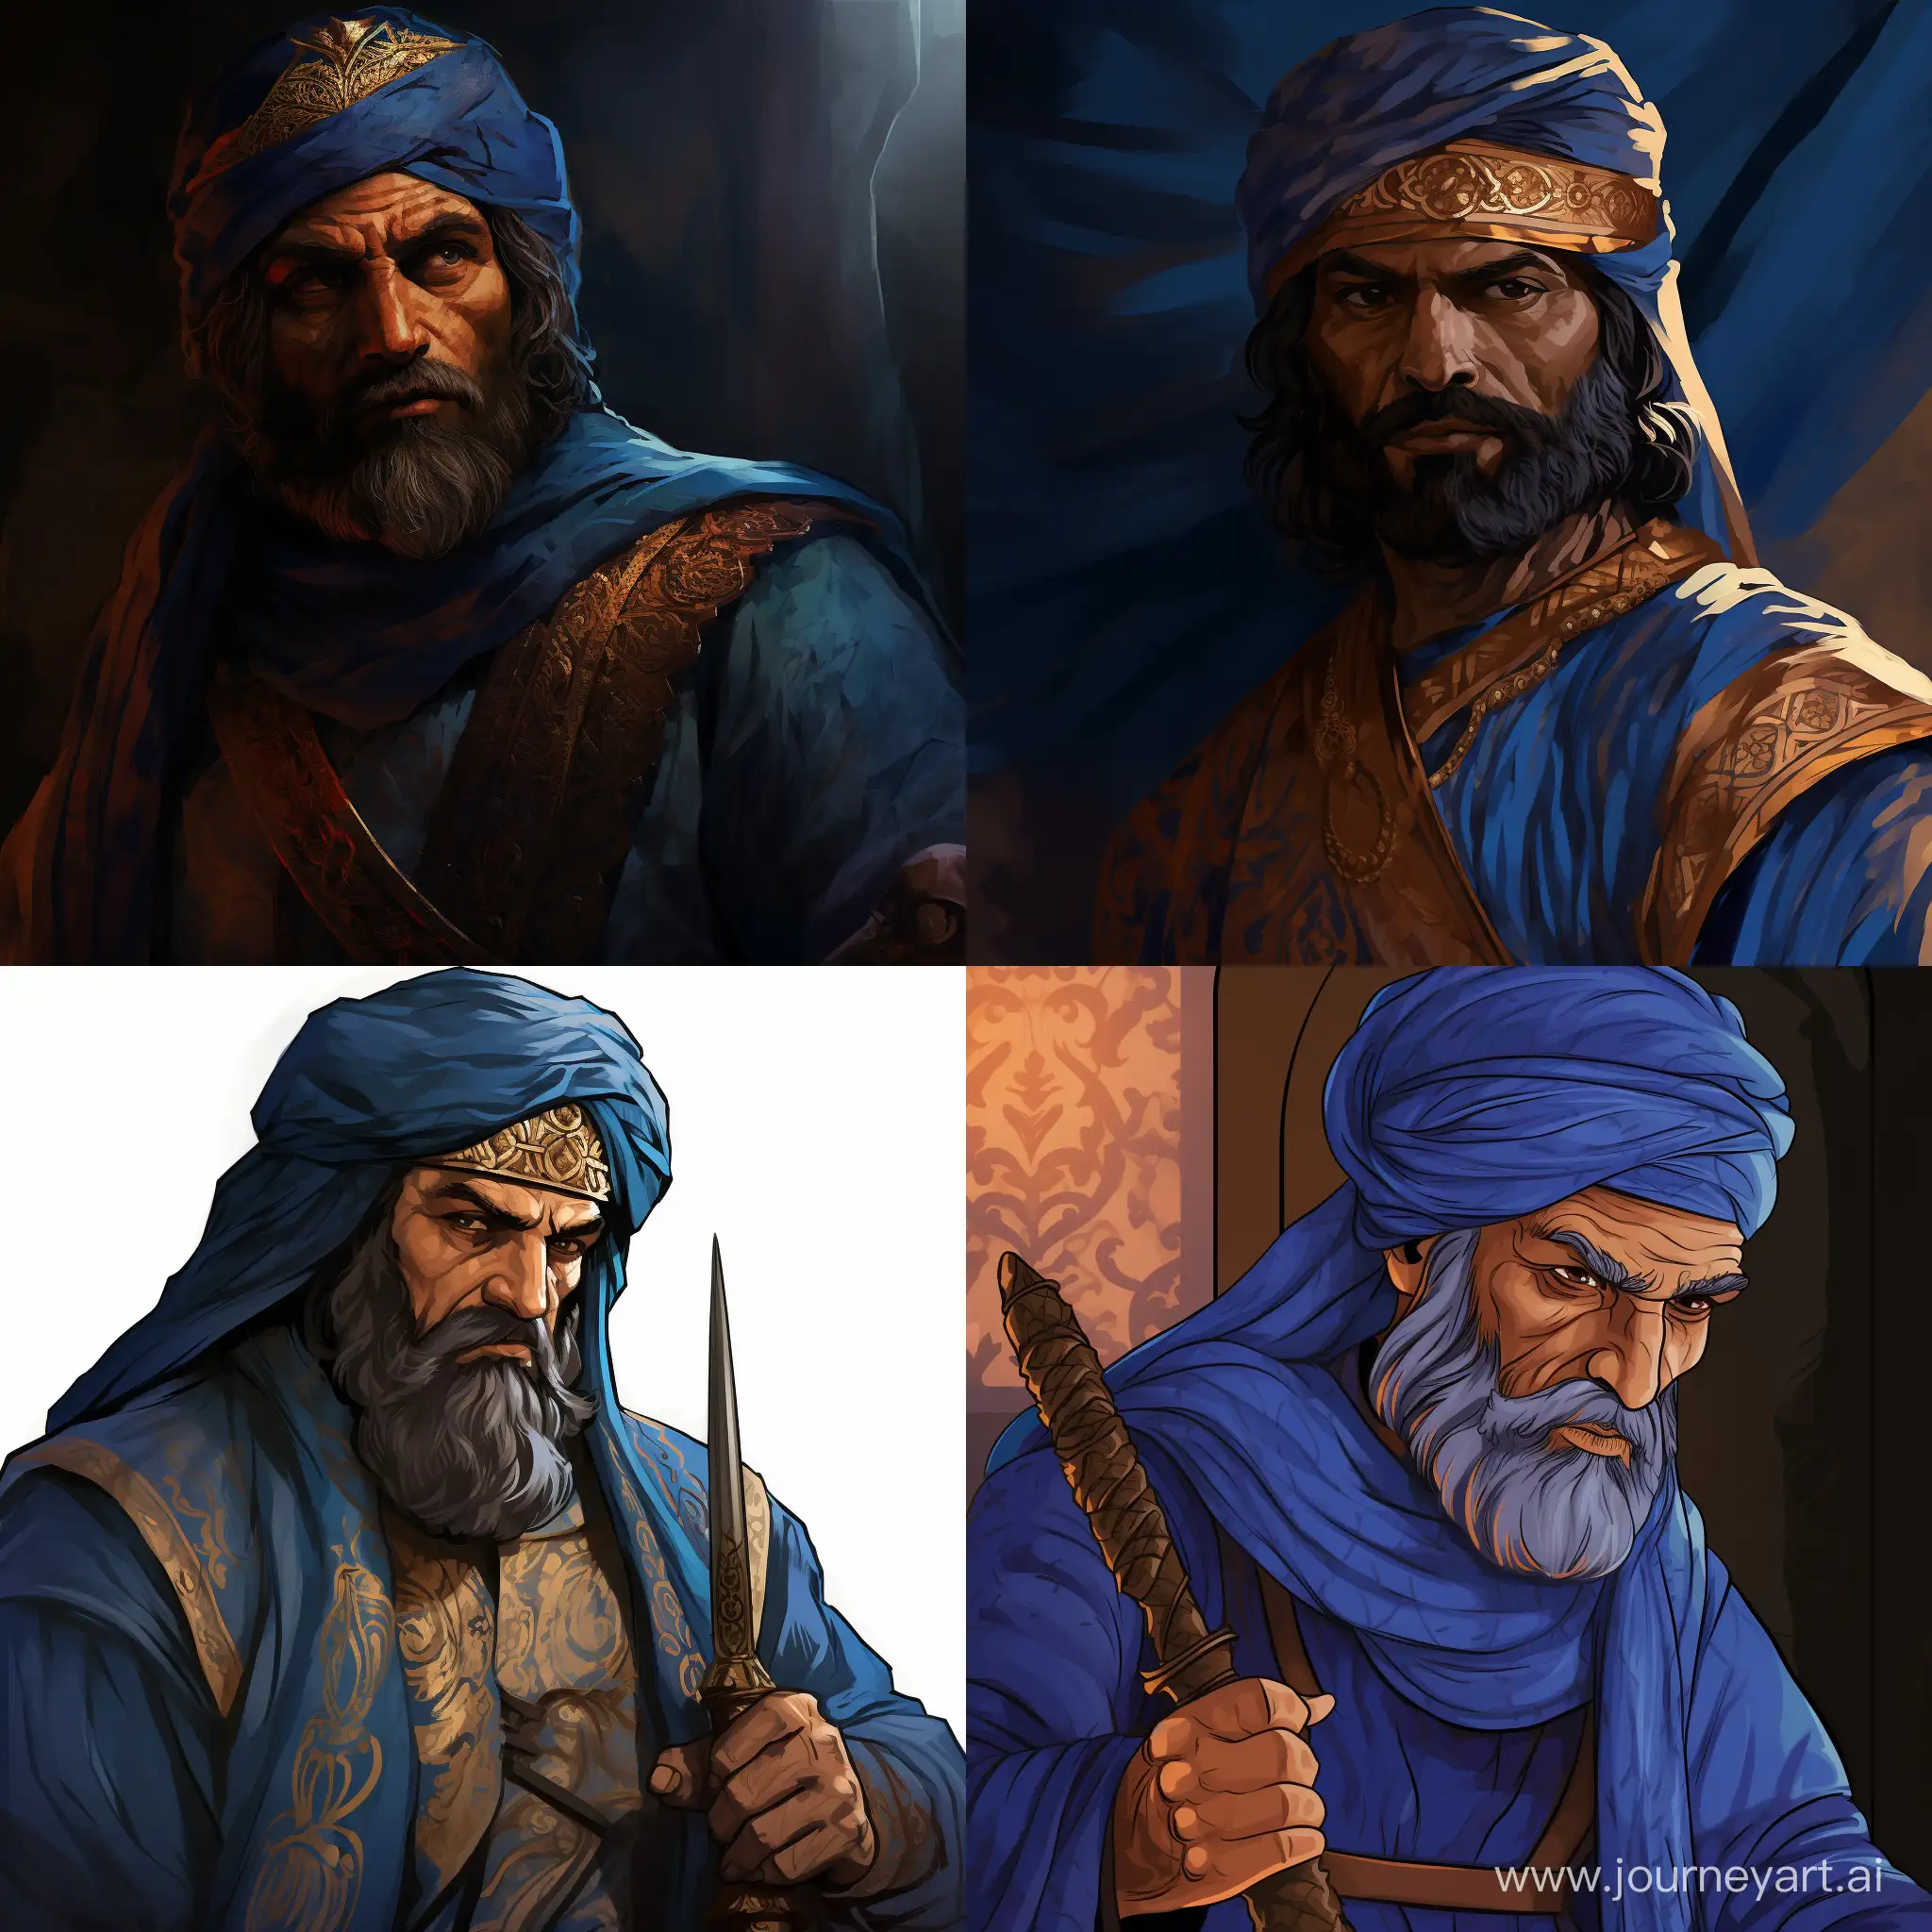 There are some thumbnail images available on YouTube with a shining blue subject, sometimes with blue hues on the face and occasionally on wrinkled clothing. Now, I want to create a textual description based on the following scenario: A commander who has drawn his sword, placing it at the neck of a Persian king. The Persian king has lifted his hands and has a terrified expression. The king wears the crown of the Achaemenid Empire. The setting is within the magnificent palace of Persepolis, before its destruction